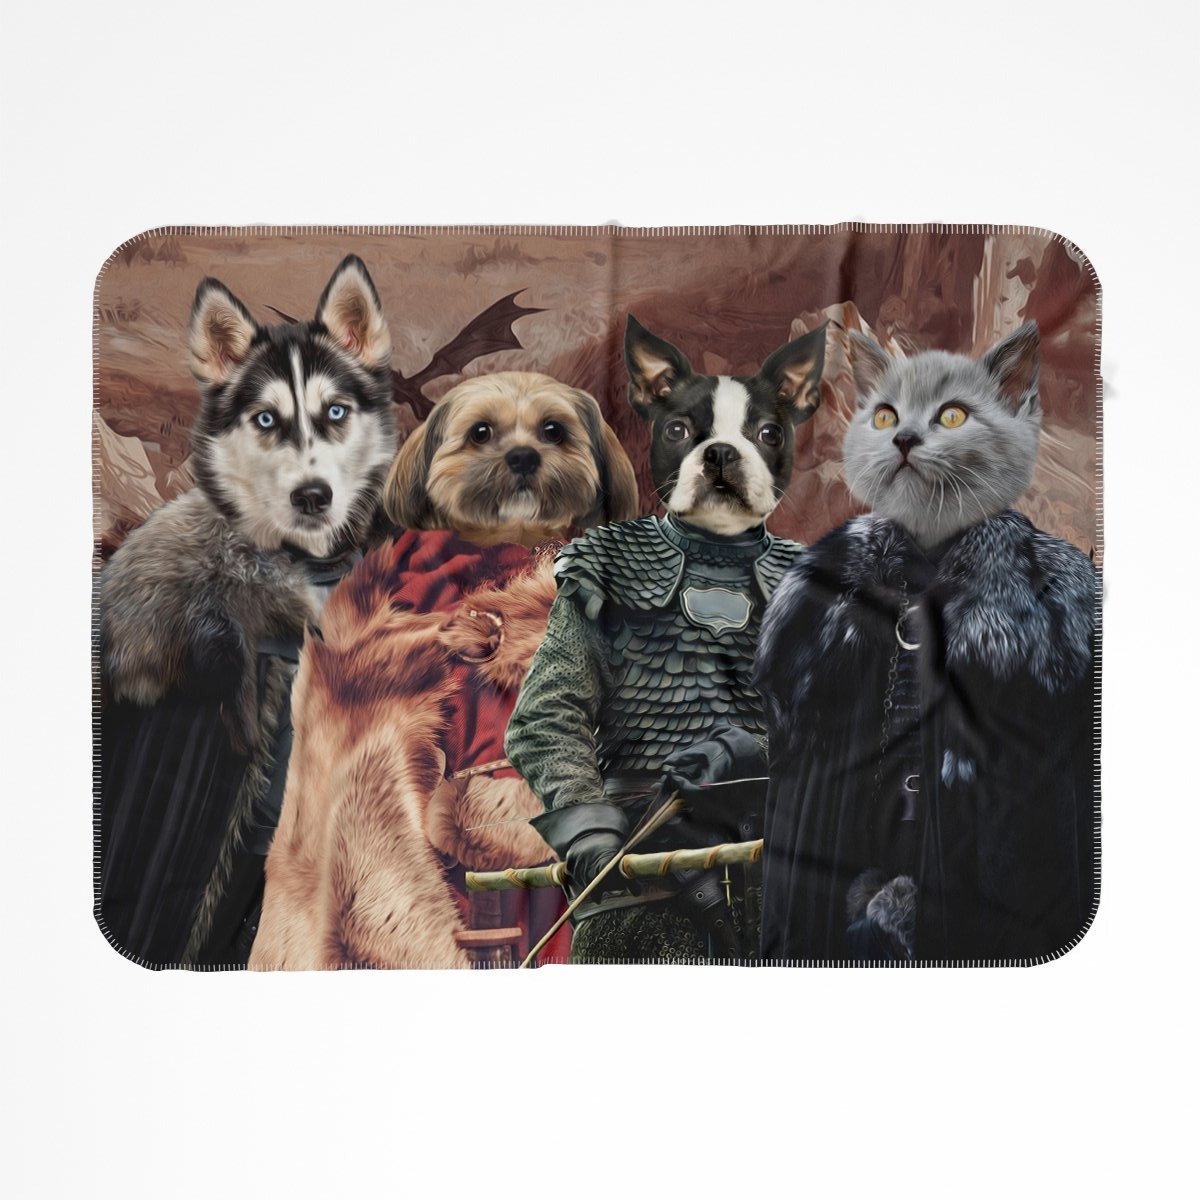 Game Of Thrones: Custom Pet Blanket - Paw & Glory - #pet portraits# - #dog portraits# - #pet portraits uk#Pawandglory, Pet art blanket,put your pet on a blanket, put dog on blanket, picture dog blanket, blanket with pet photo, blanket with animal picture